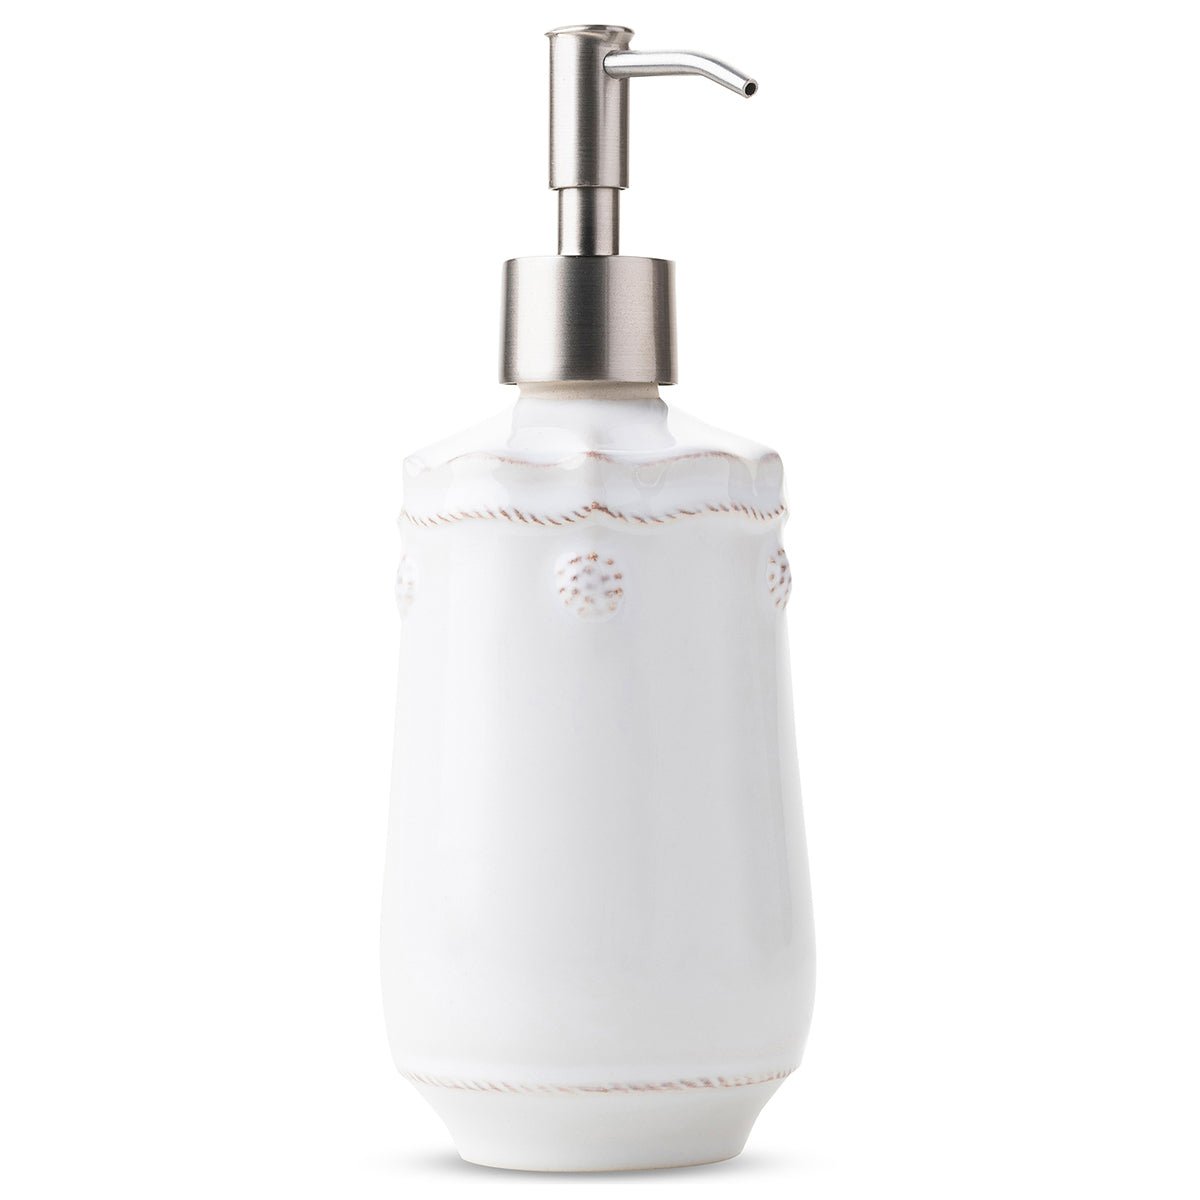 Berry & Thread Soap/Lotion Dispenser - Gaines Jewelers